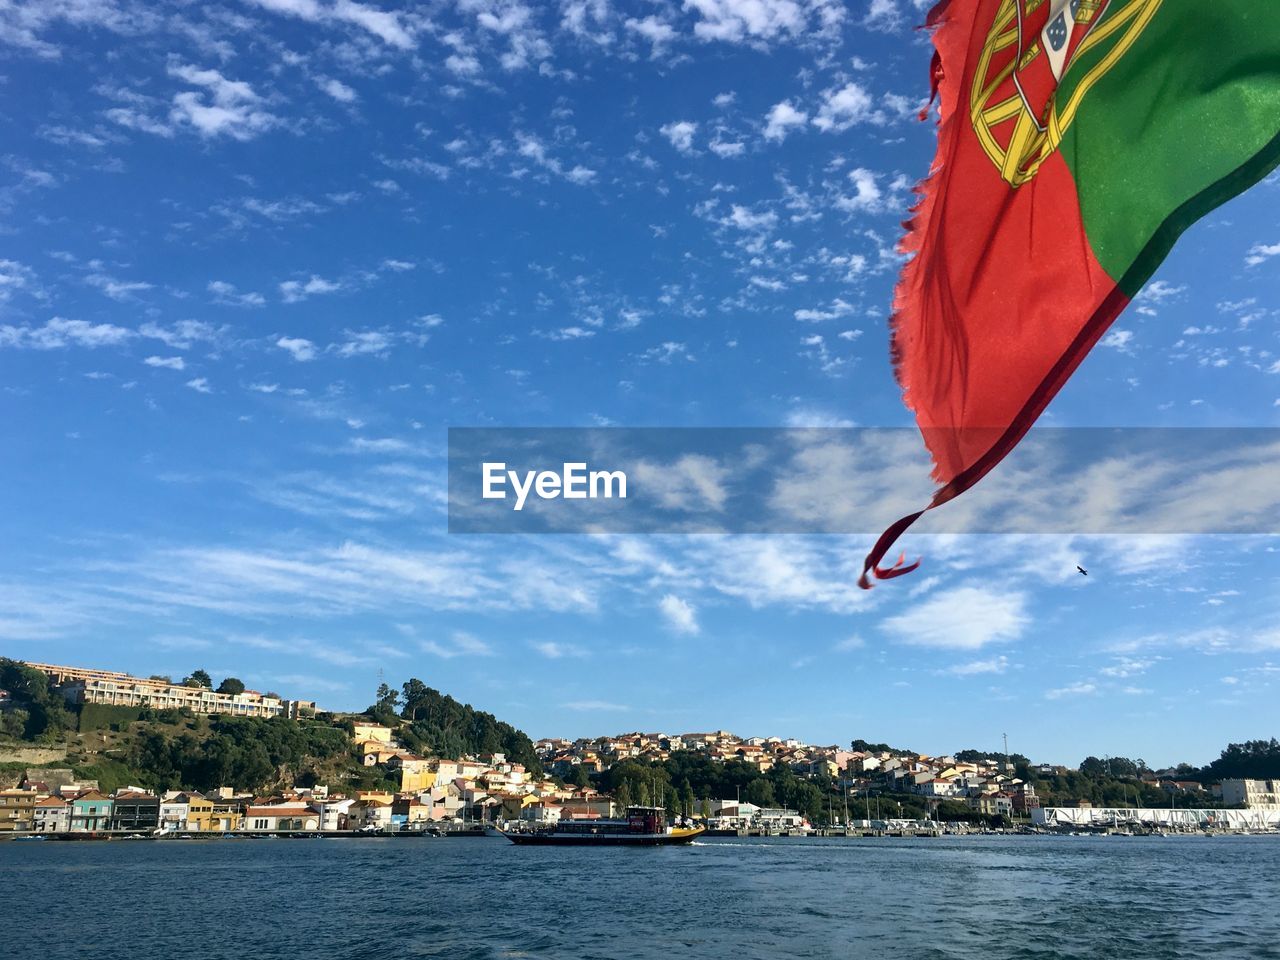 Scenic view of a portuguese flag at the back of a boat with blue sky and a small village in the back